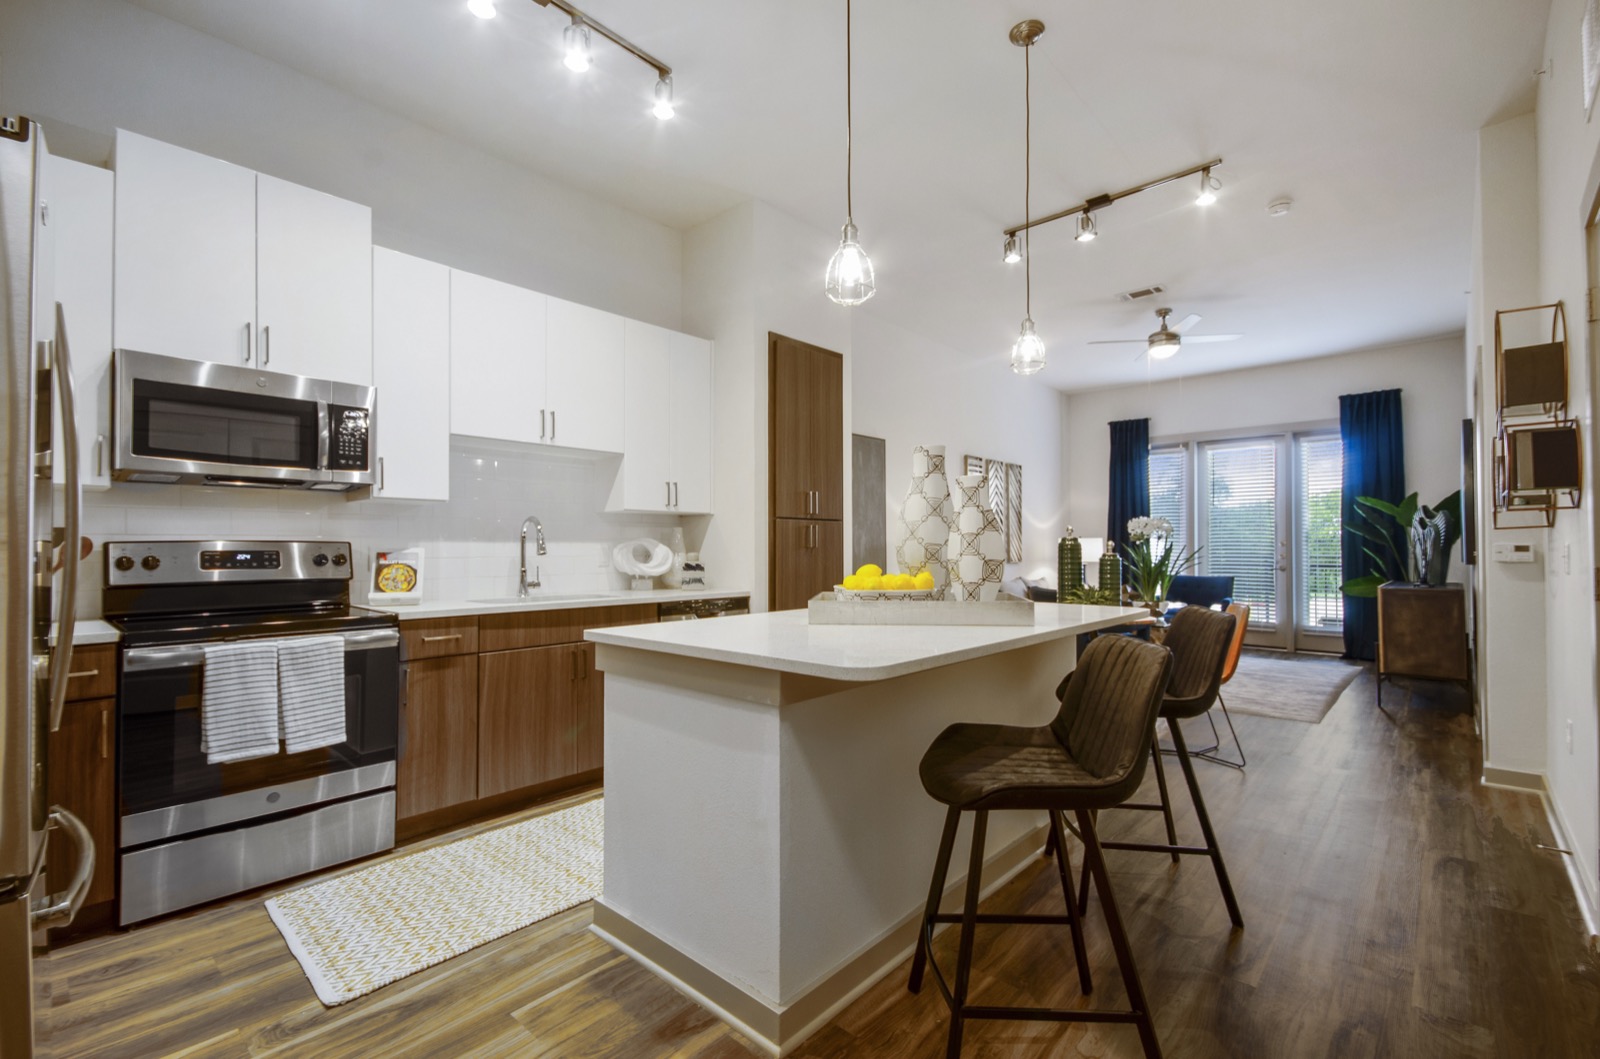 Apartments in Garland for Rent- Spacious Kitchen With Island, Wood Cabinets White Quartz Countertops, and Stainless Steel Appliances